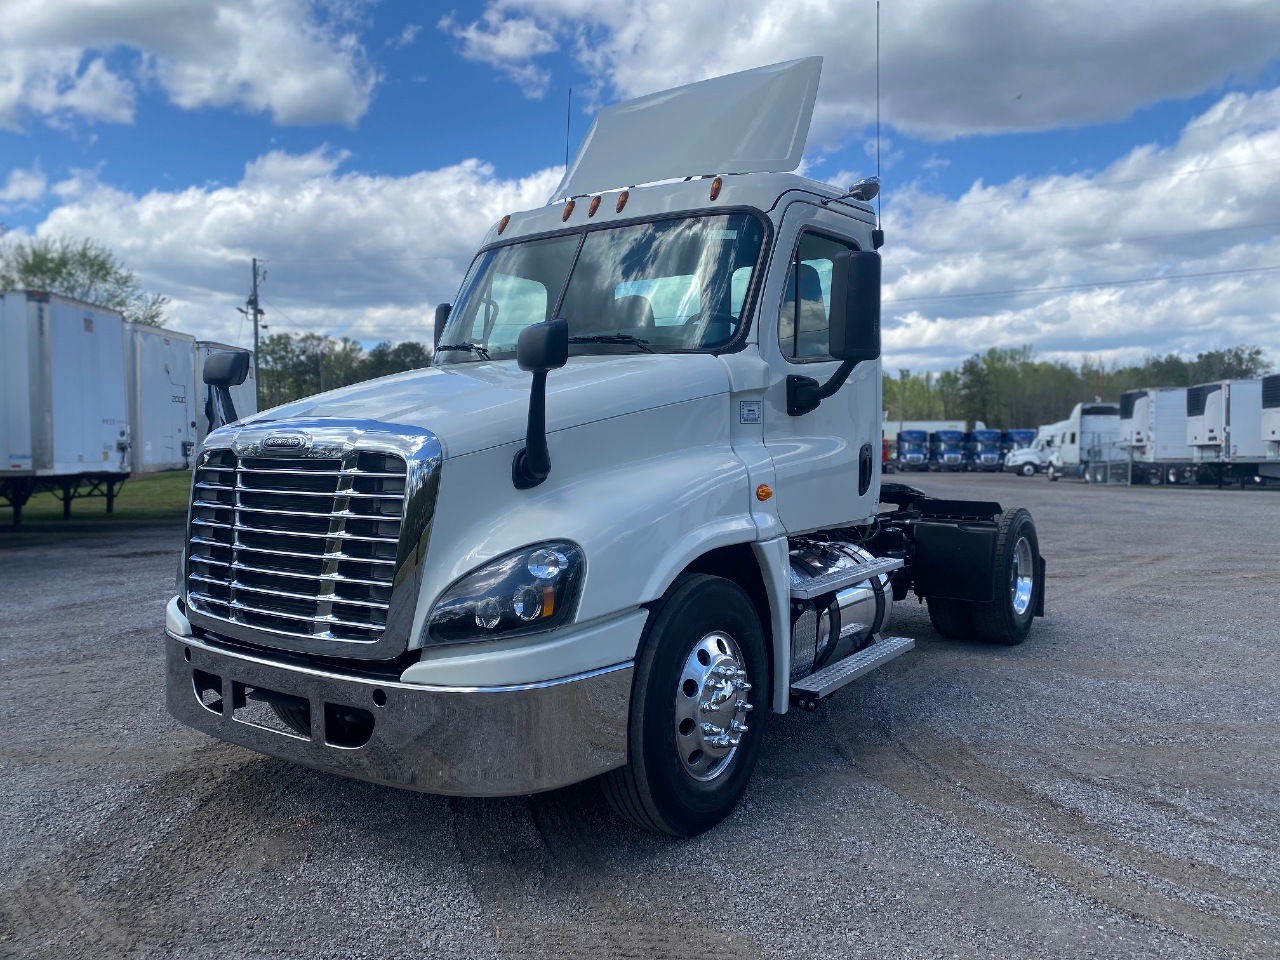 USED 2016 FREIGHTLINER CASCADIA TANDEM AXLE DAYCAB TRUCK #15250